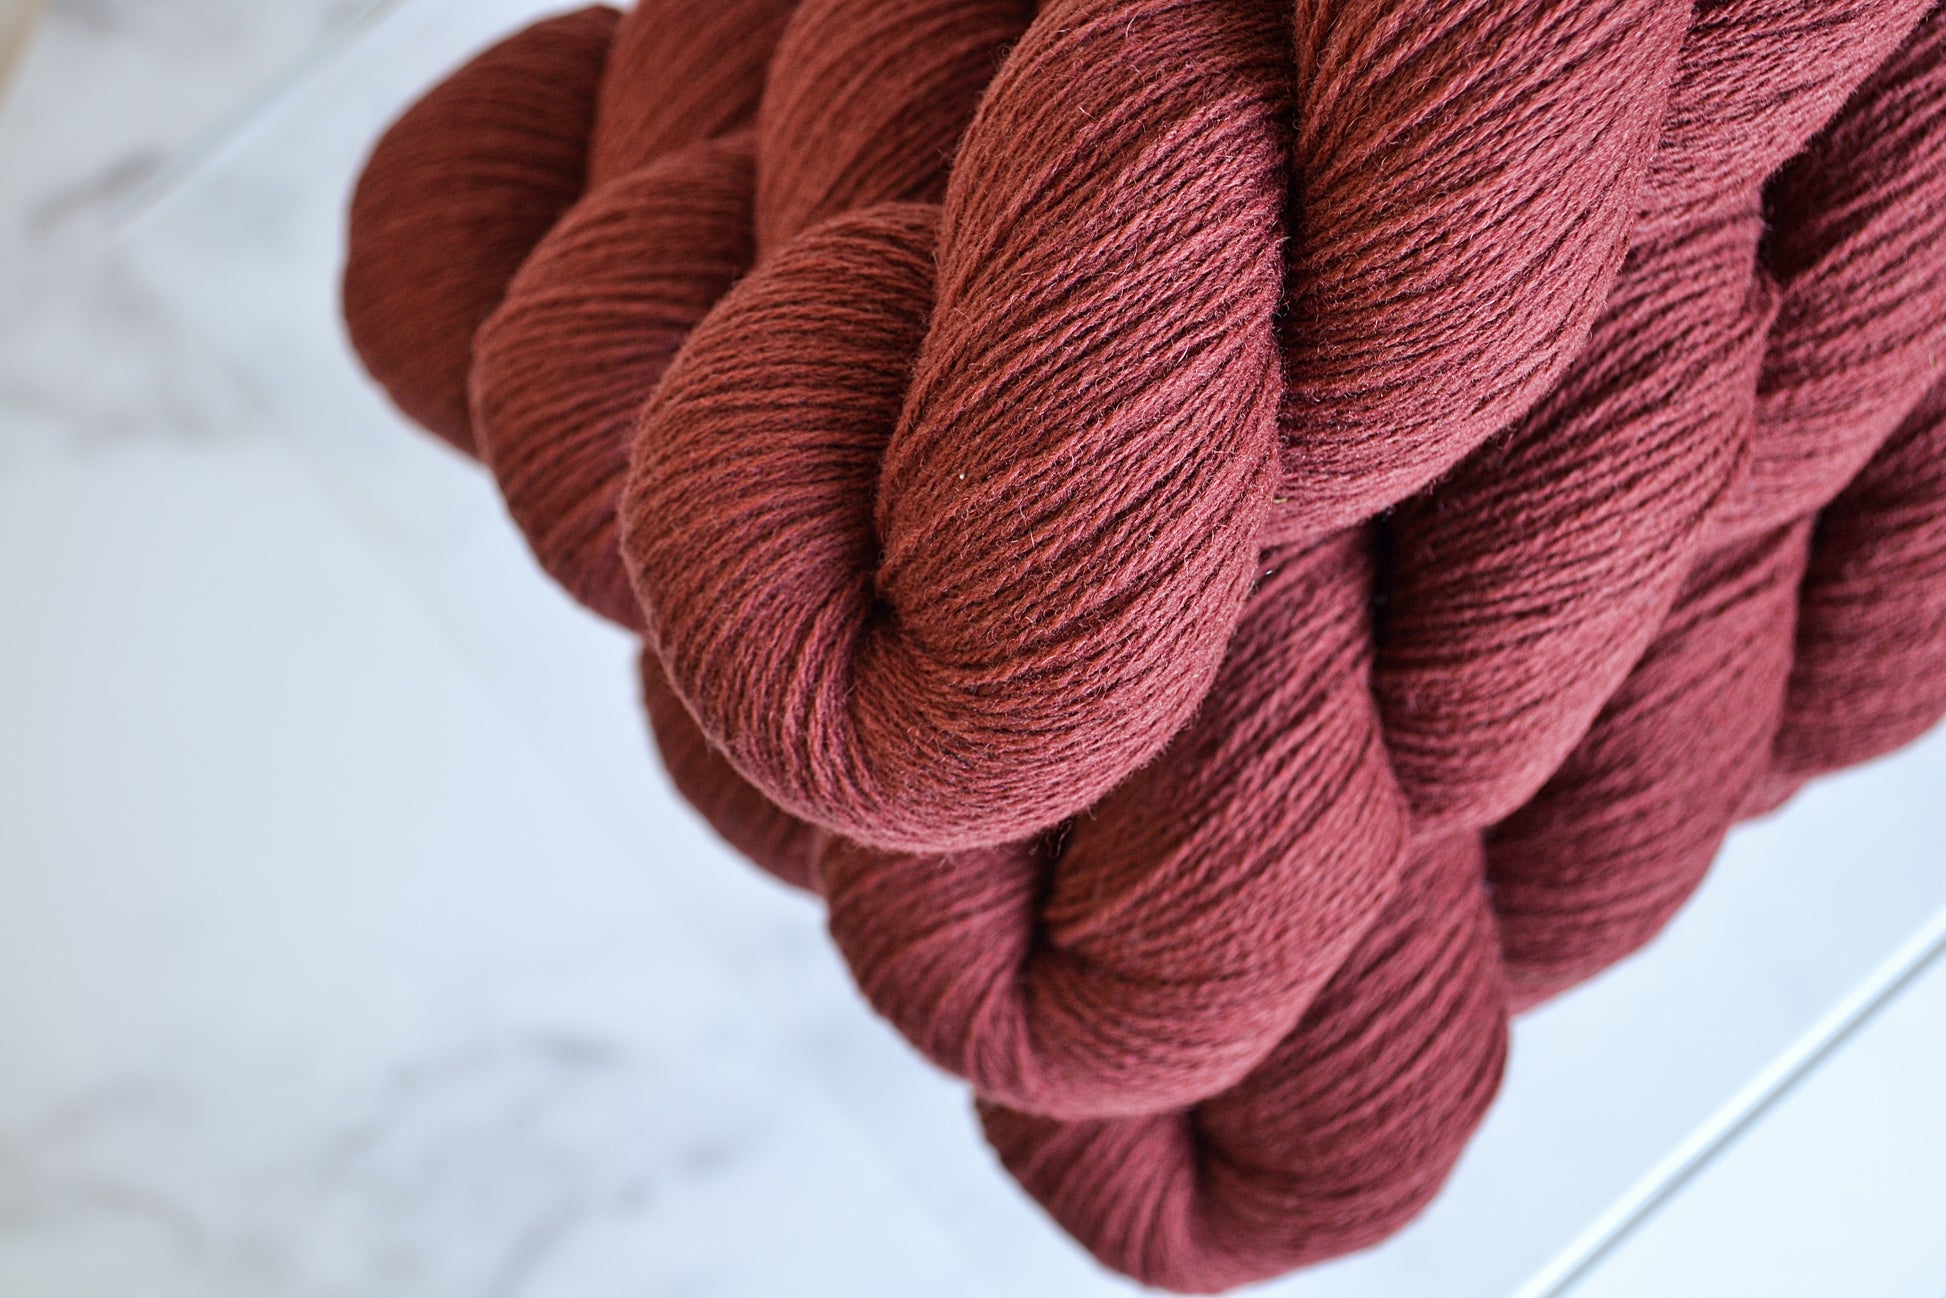 Fjord Lambswool Yarn - Qing Fibre - Indie Hand-Dyed Yarn